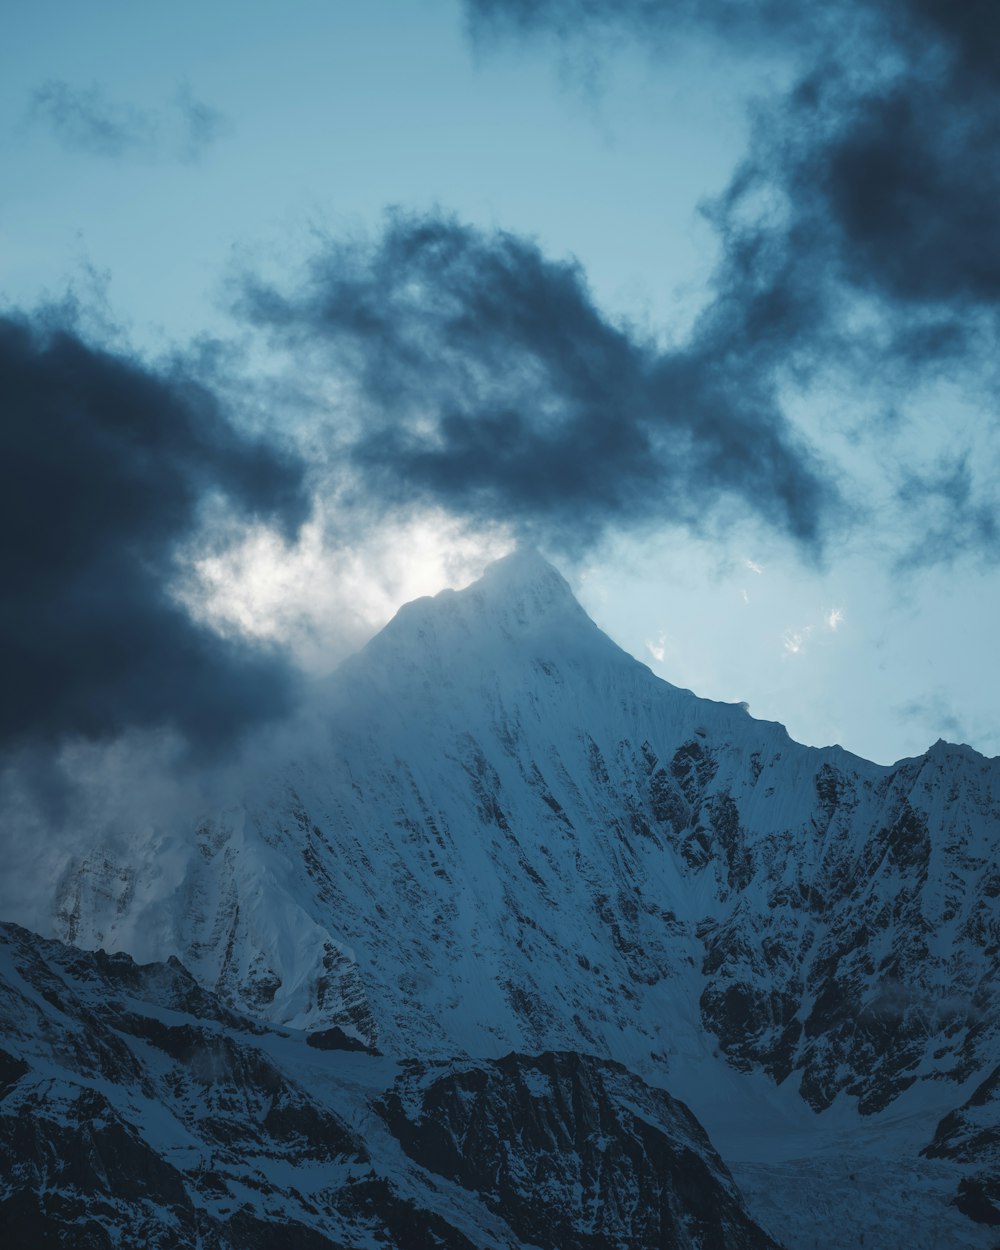 snow-covered mountain under gray clouds at daytime